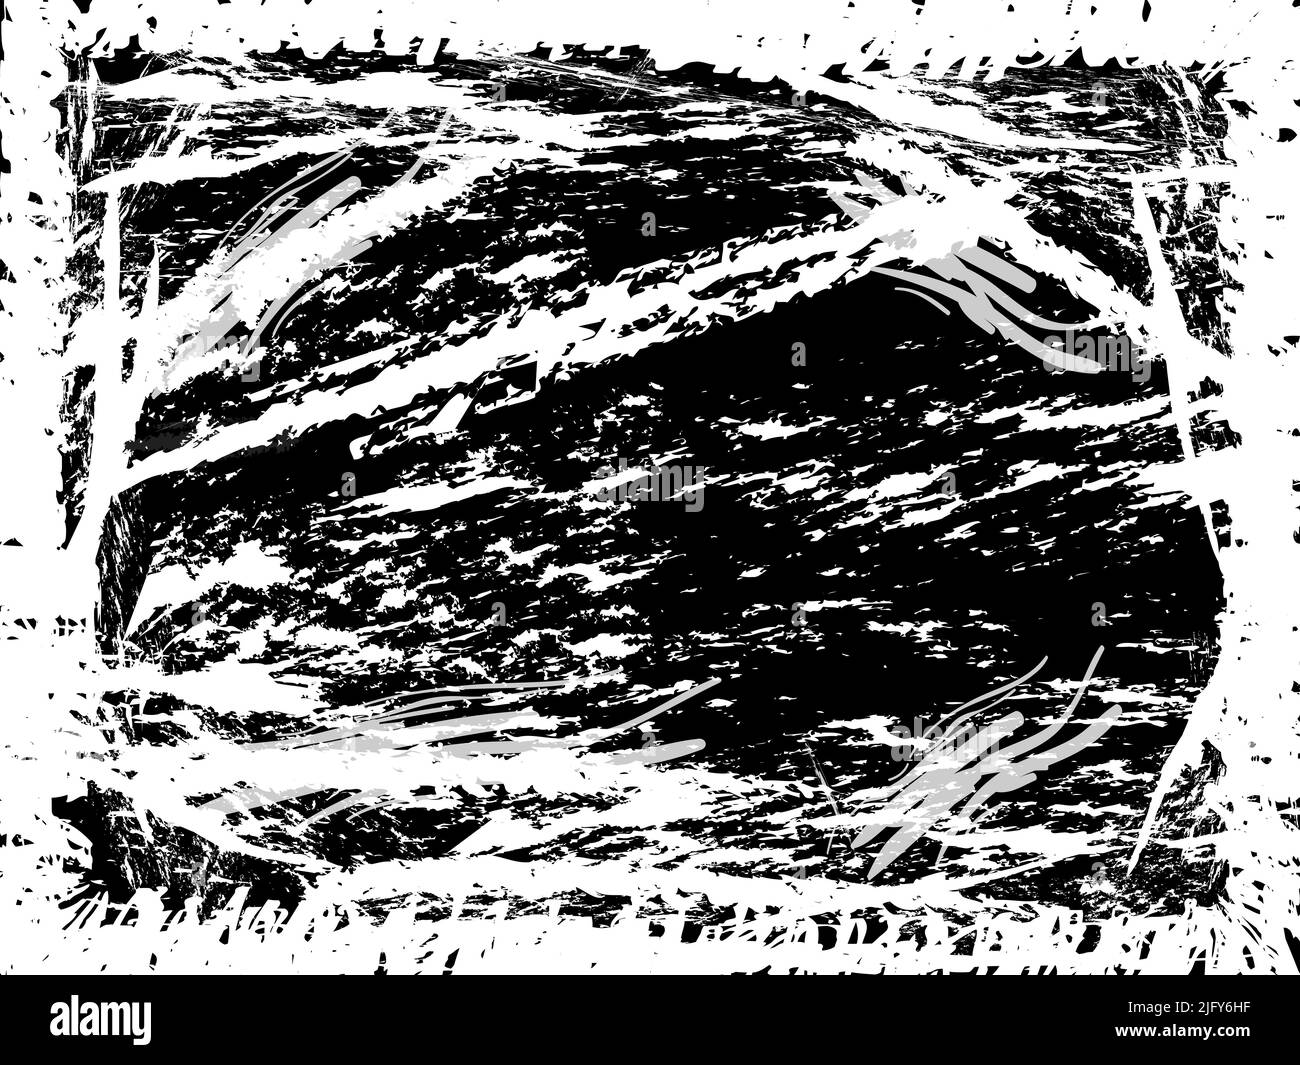 Abstract background dirty black and white artistic graphic design wallpaper backdrop frame template pattern vector illustration Stock Vector